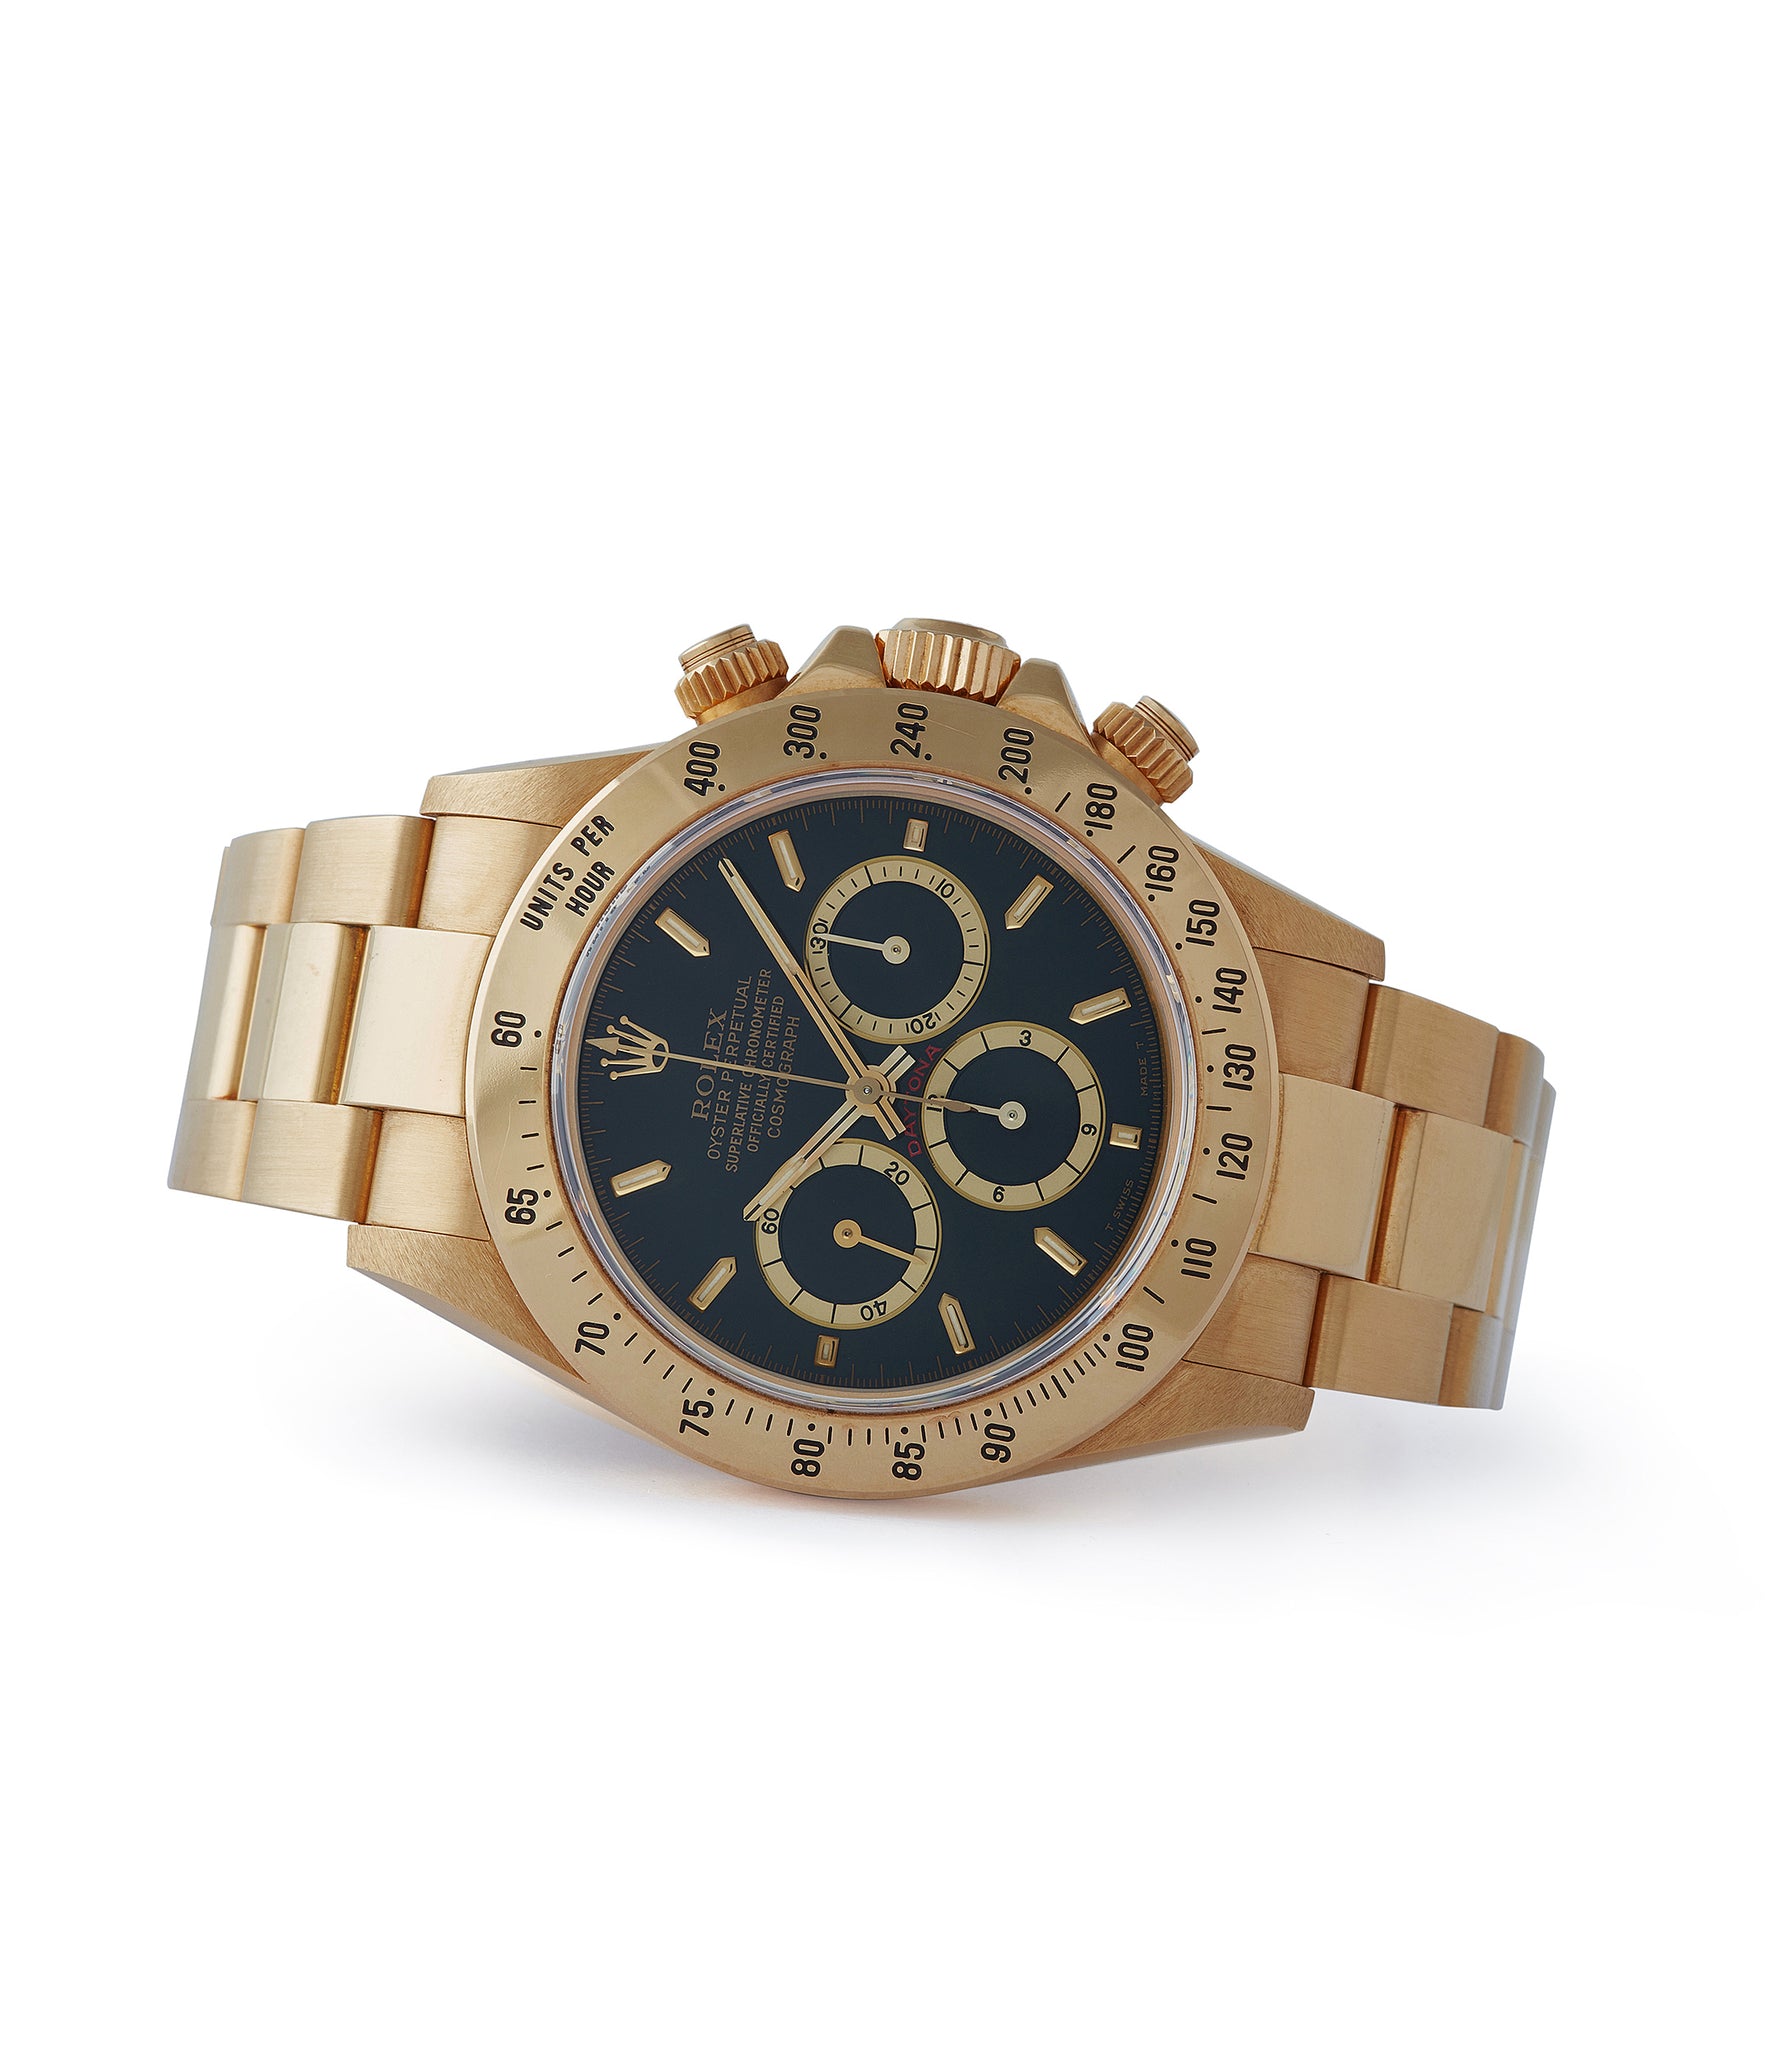 side-shot black dial Rolex Daytona Automatique 16528 Zenith yellow gold black dial full set vintage watch for sale online at A Collected Man London UK specialist of rare watches